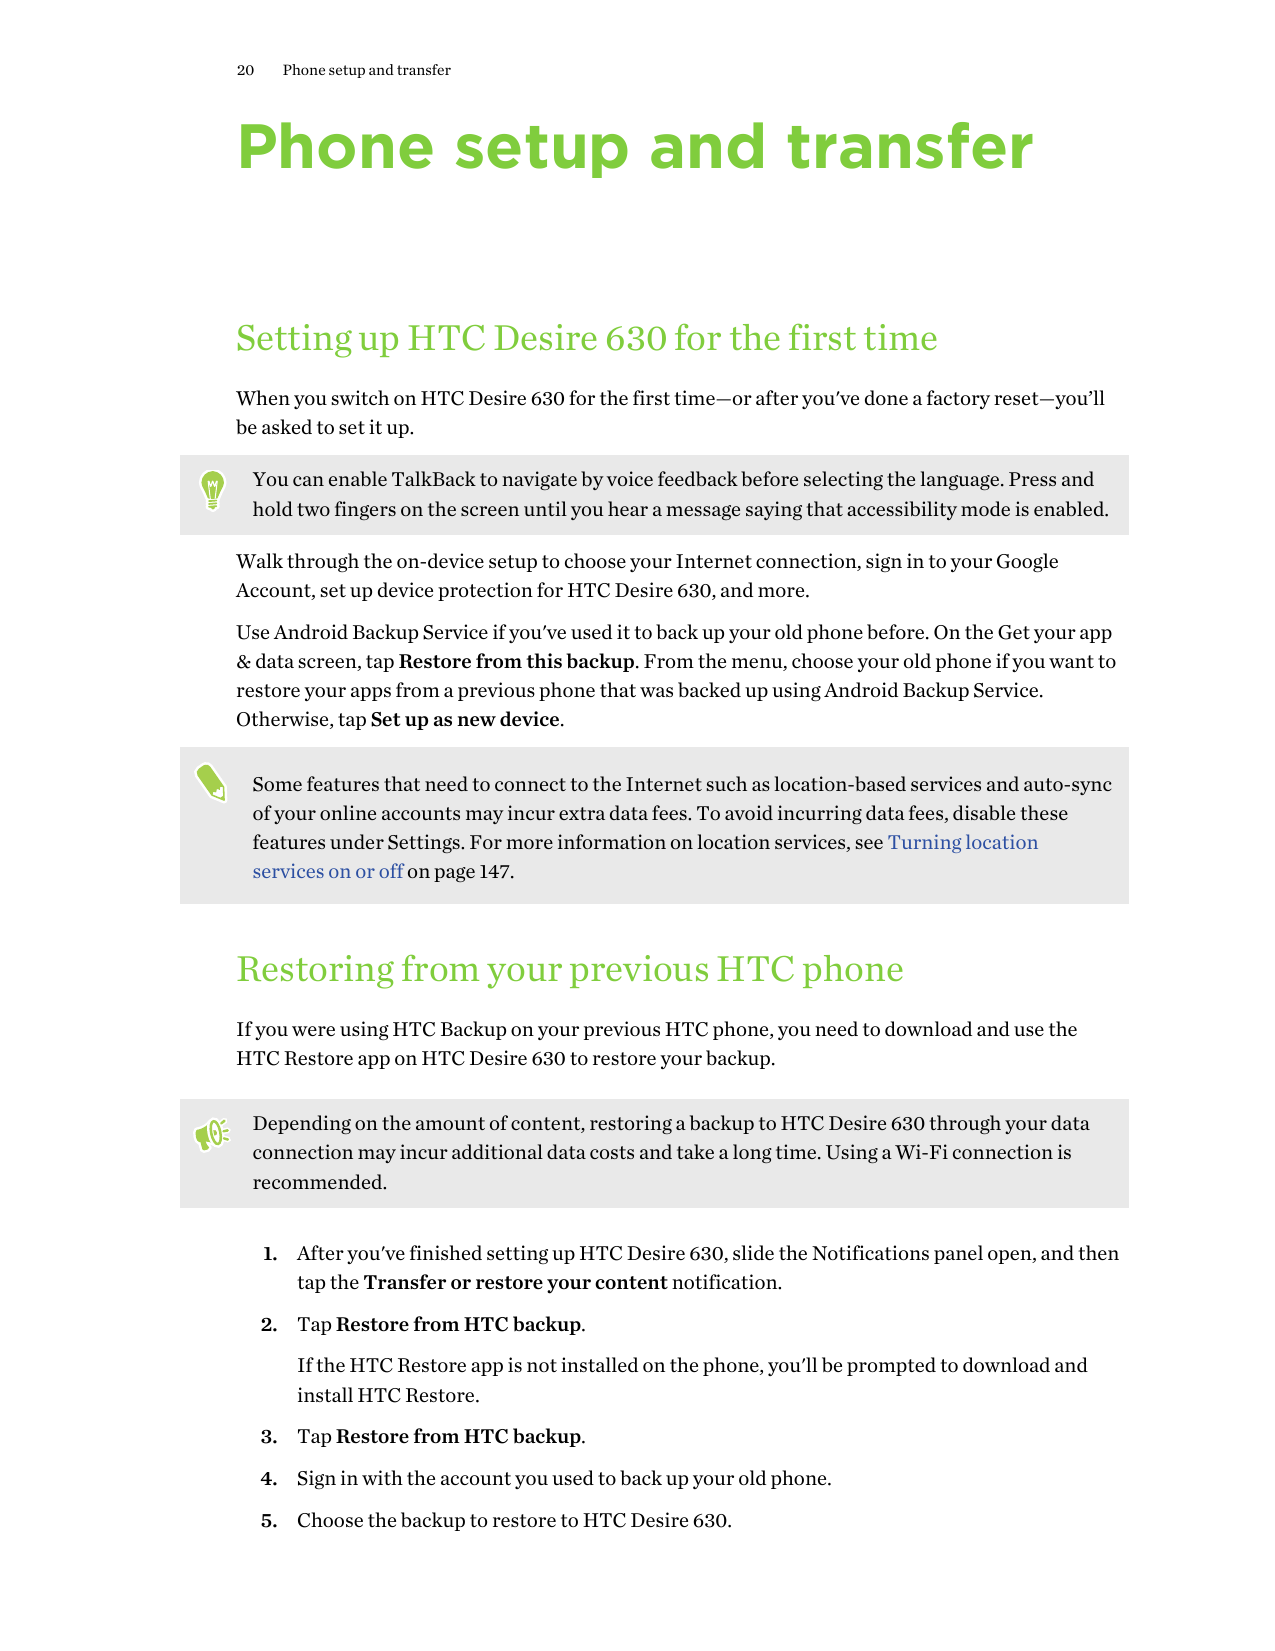 20Phone setup and transferPhone setup and transferSetting up HTC Desire 630 for the first timeWhen you switch on HTC Desire 630 